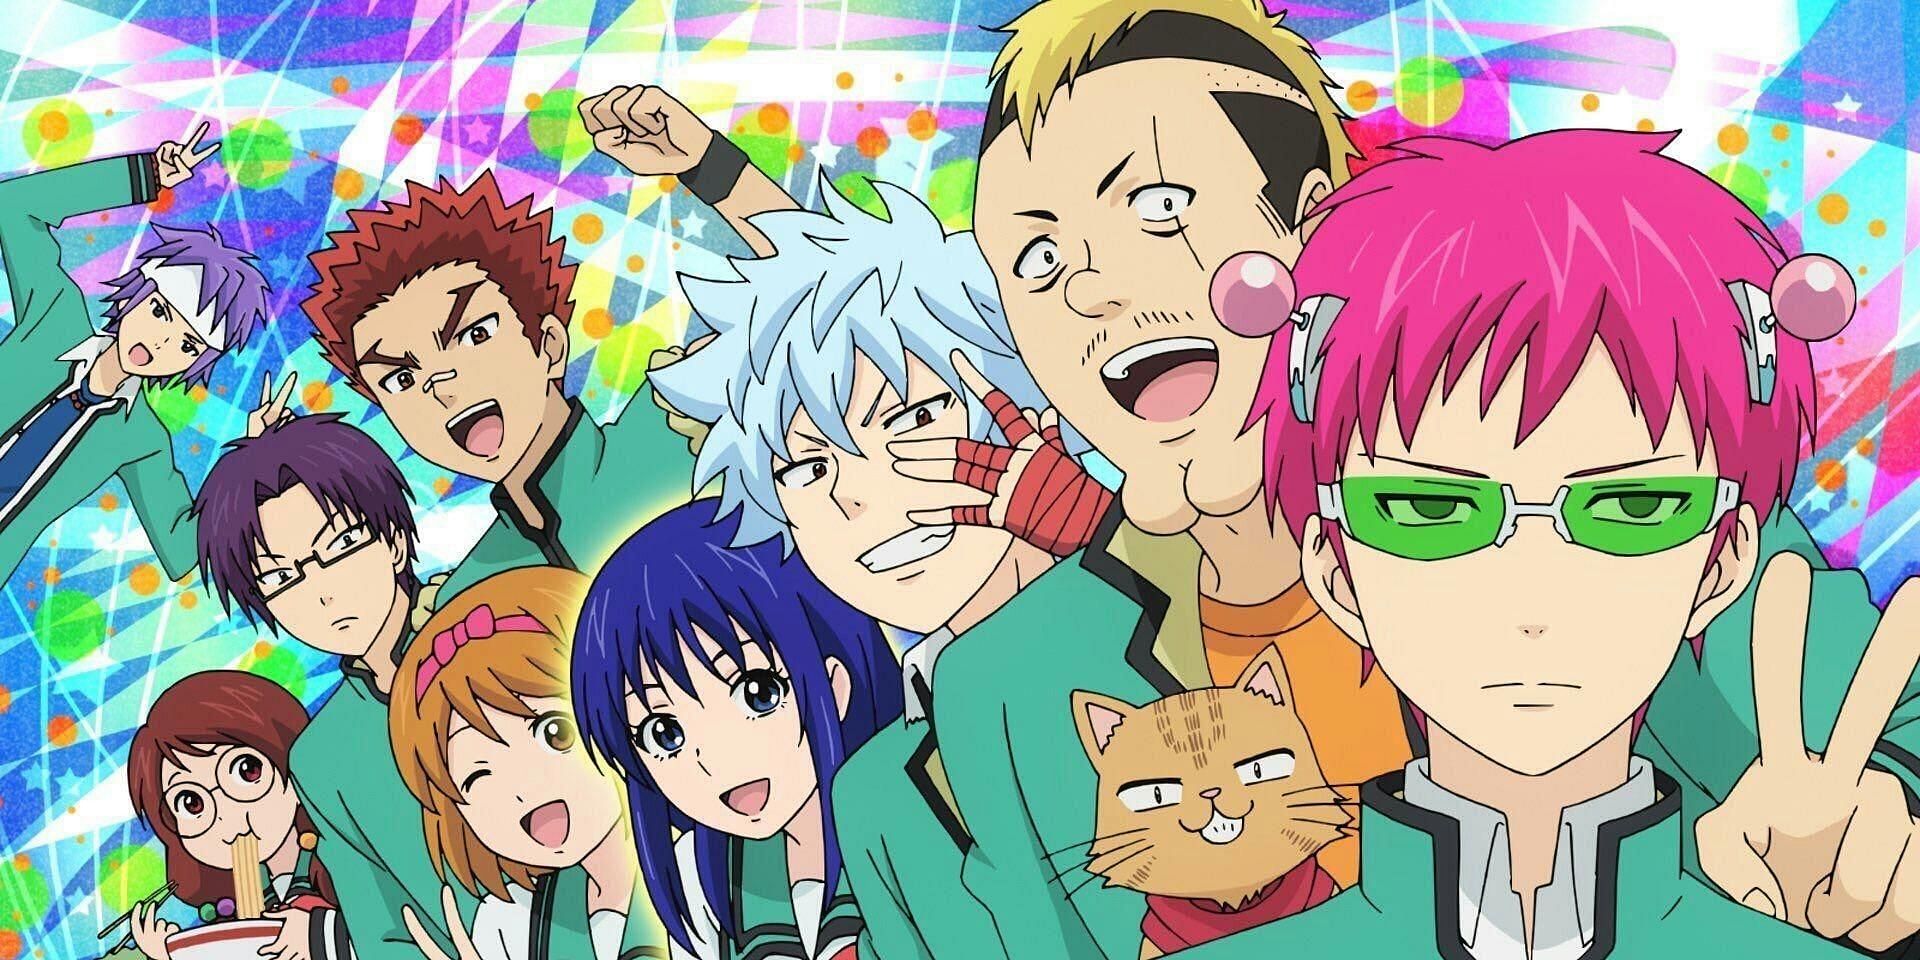 Saiki and his classmates as seen in the anime series (Image via J.C. Staff)